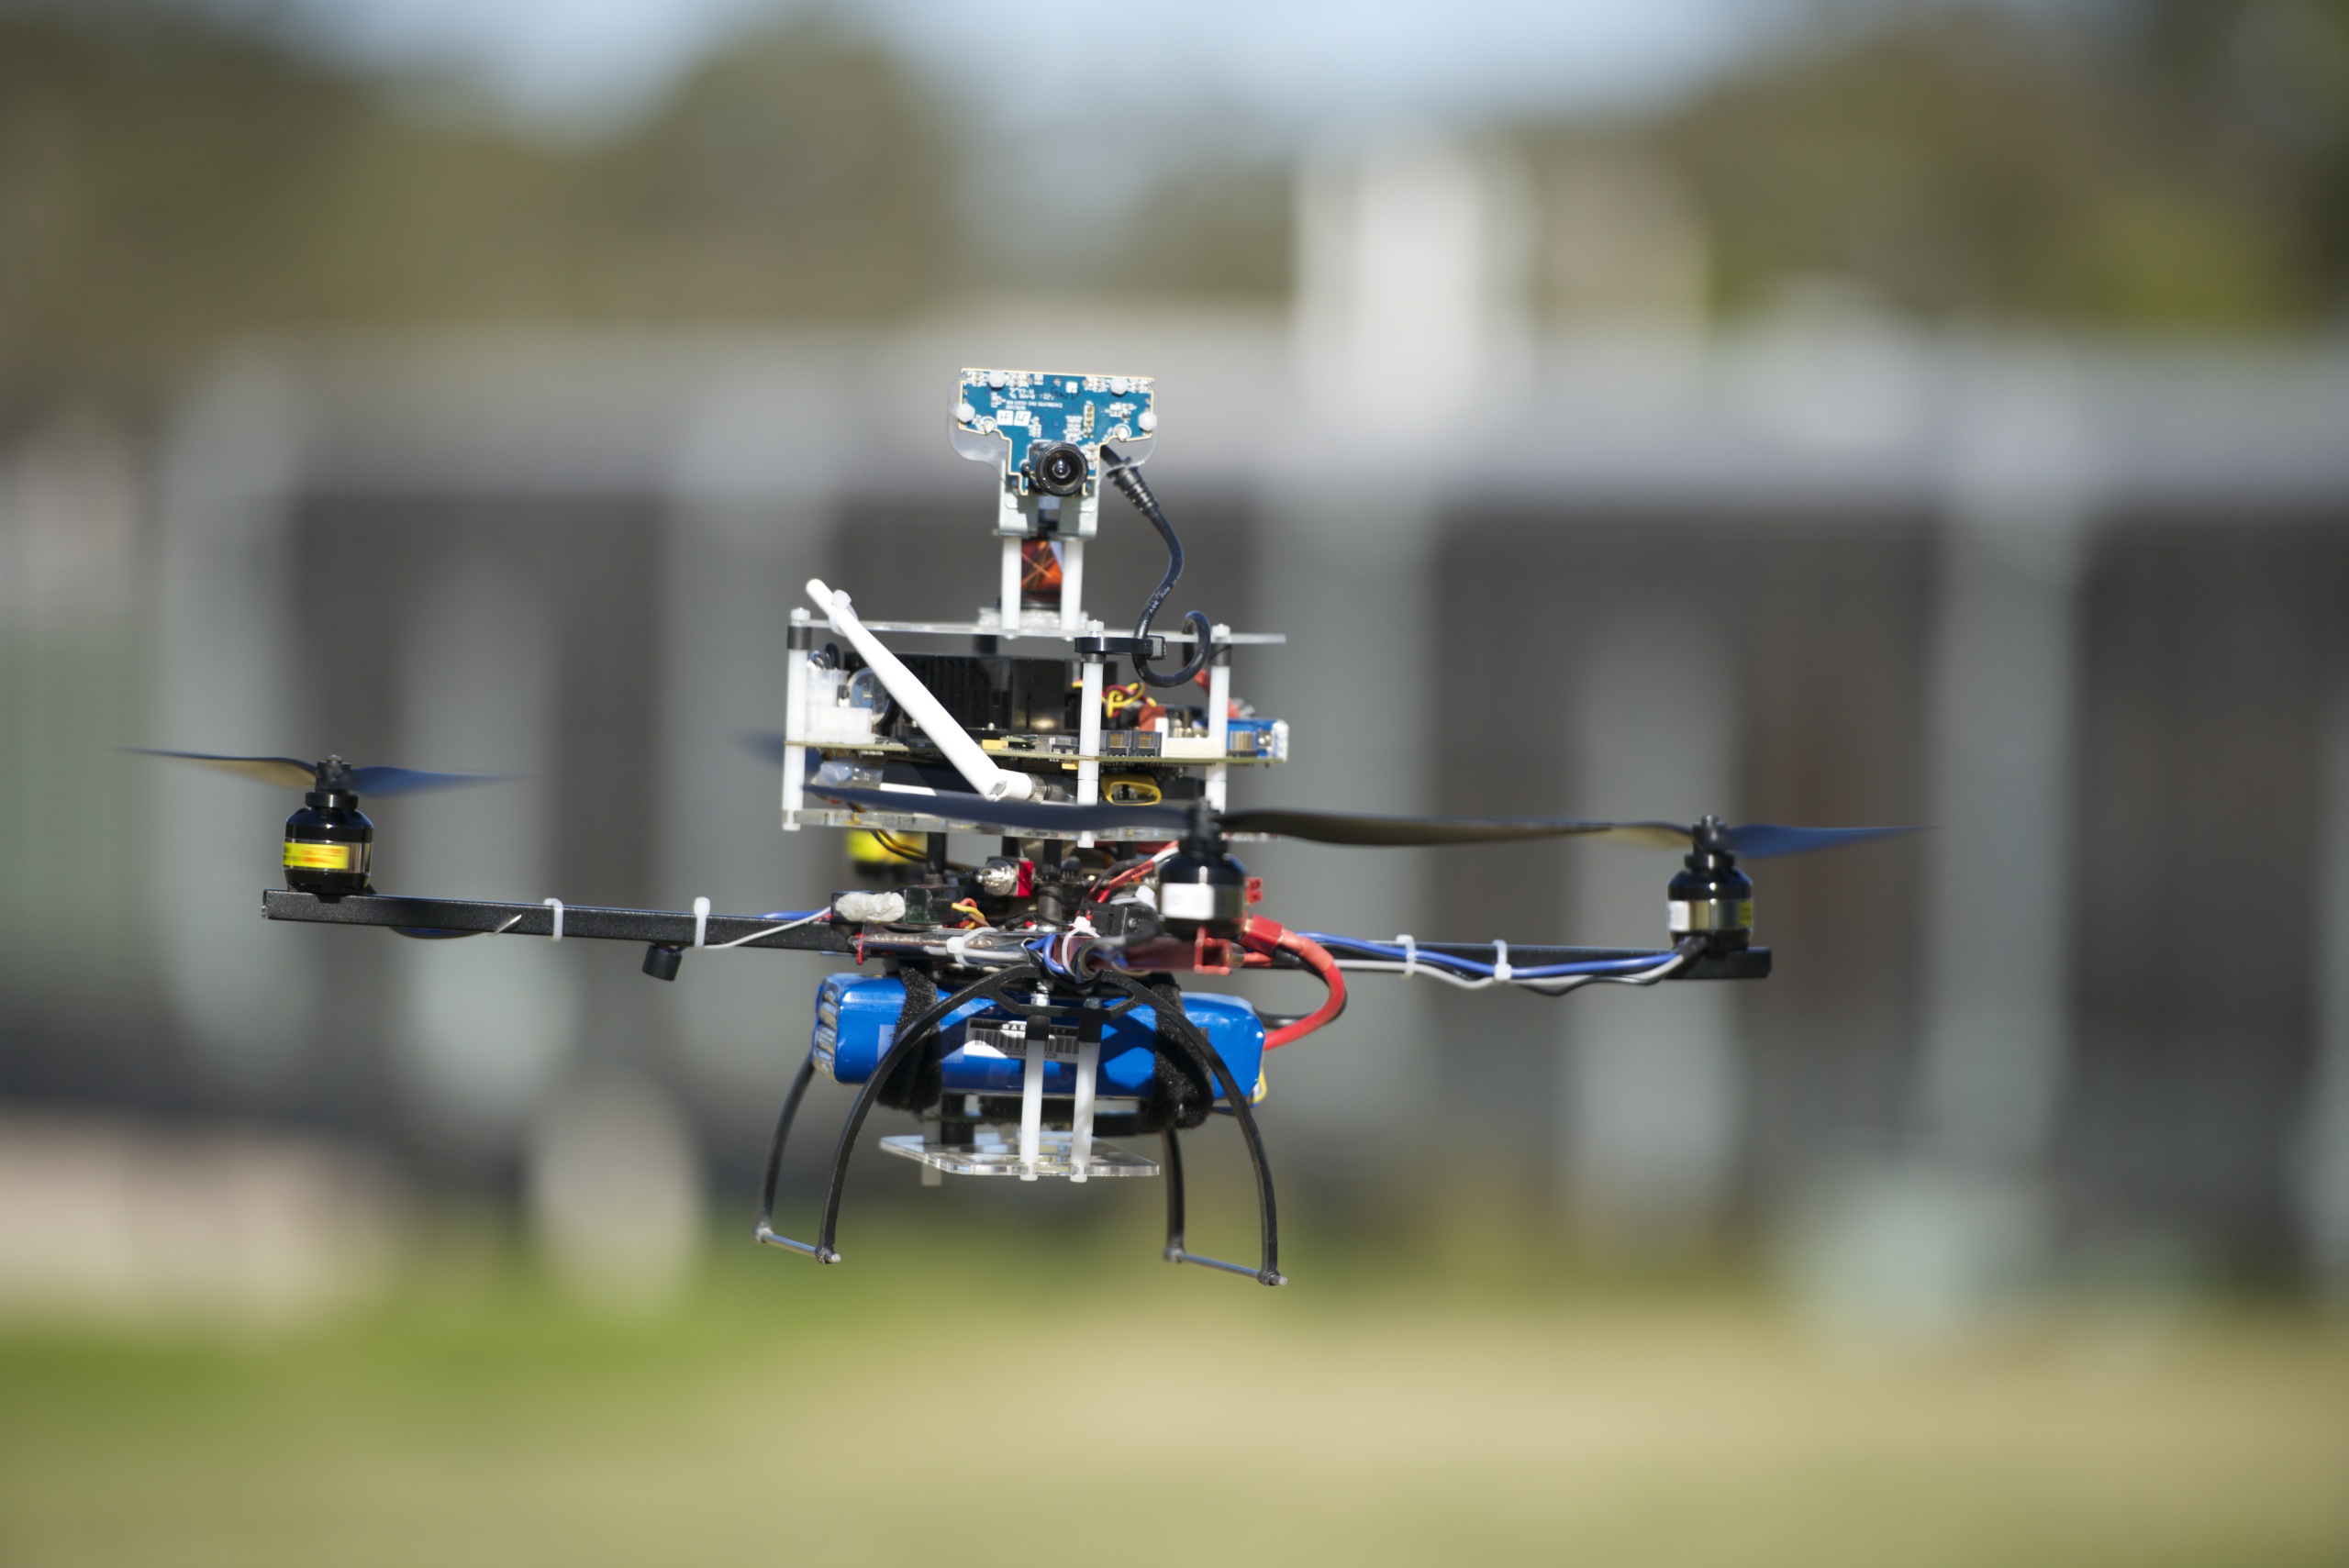 We don't mean to drone on, but the MikroKopter is one impressive bot.